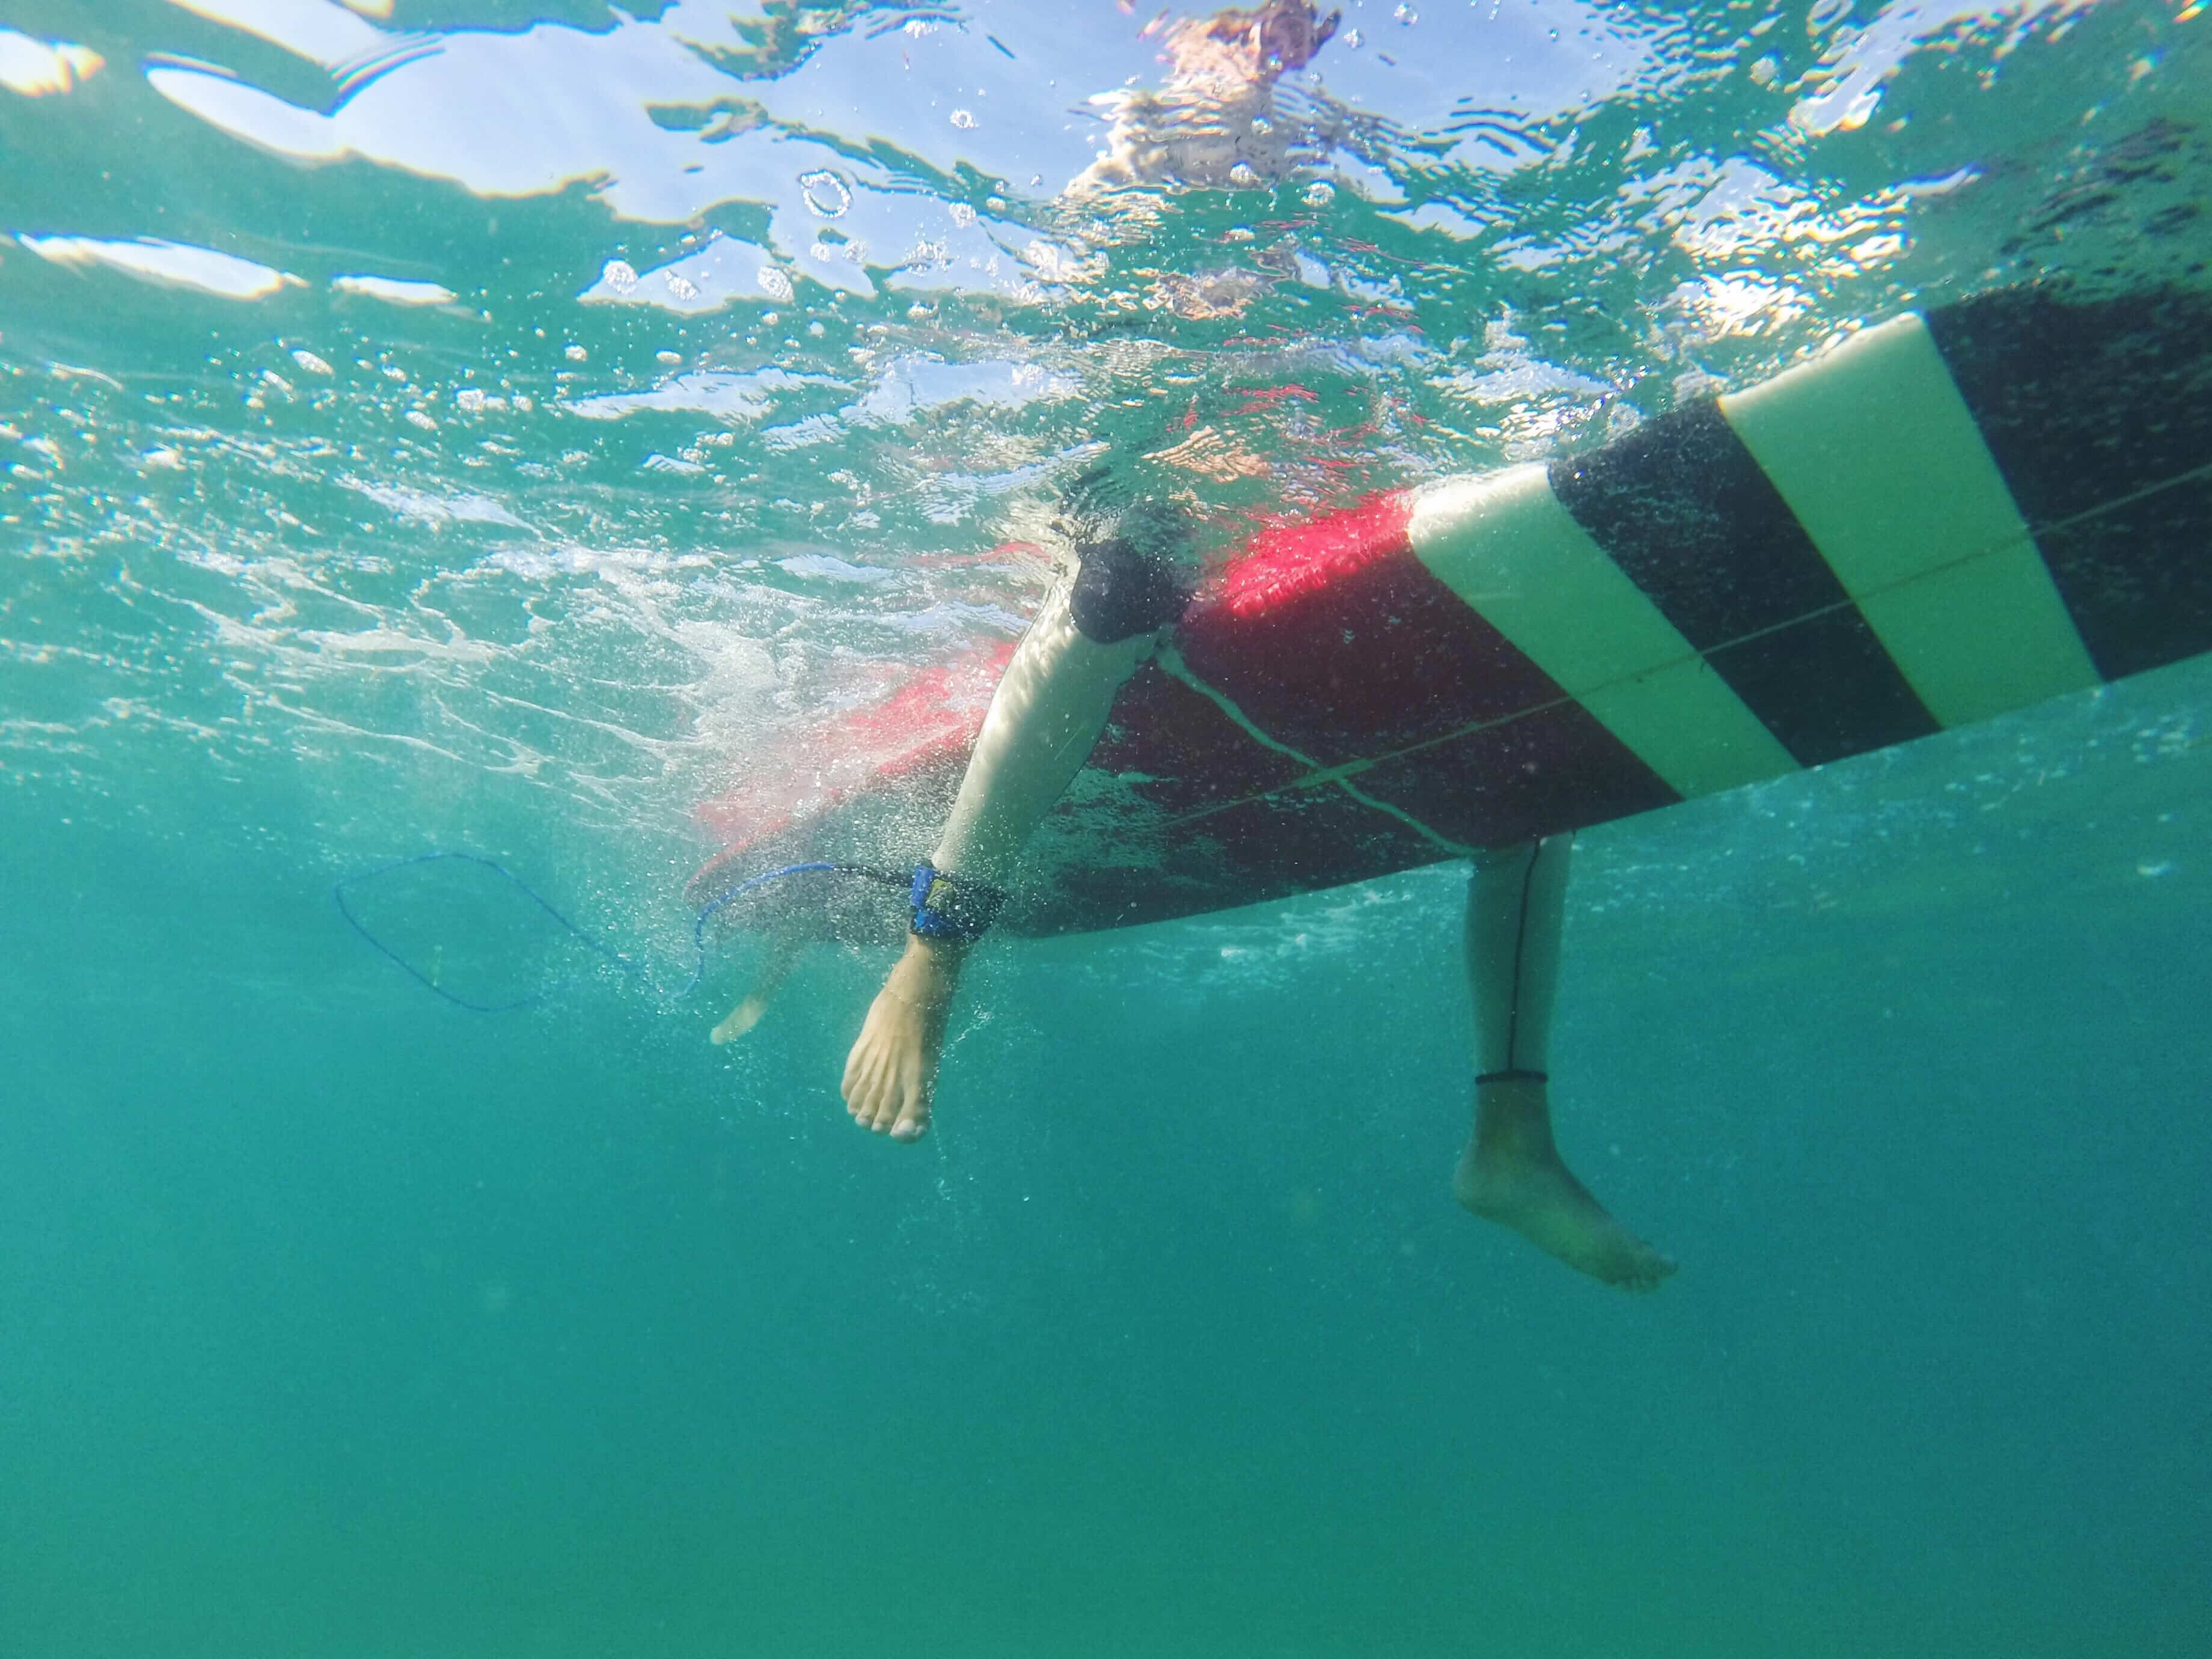 Can a 70 year old learn to surf?